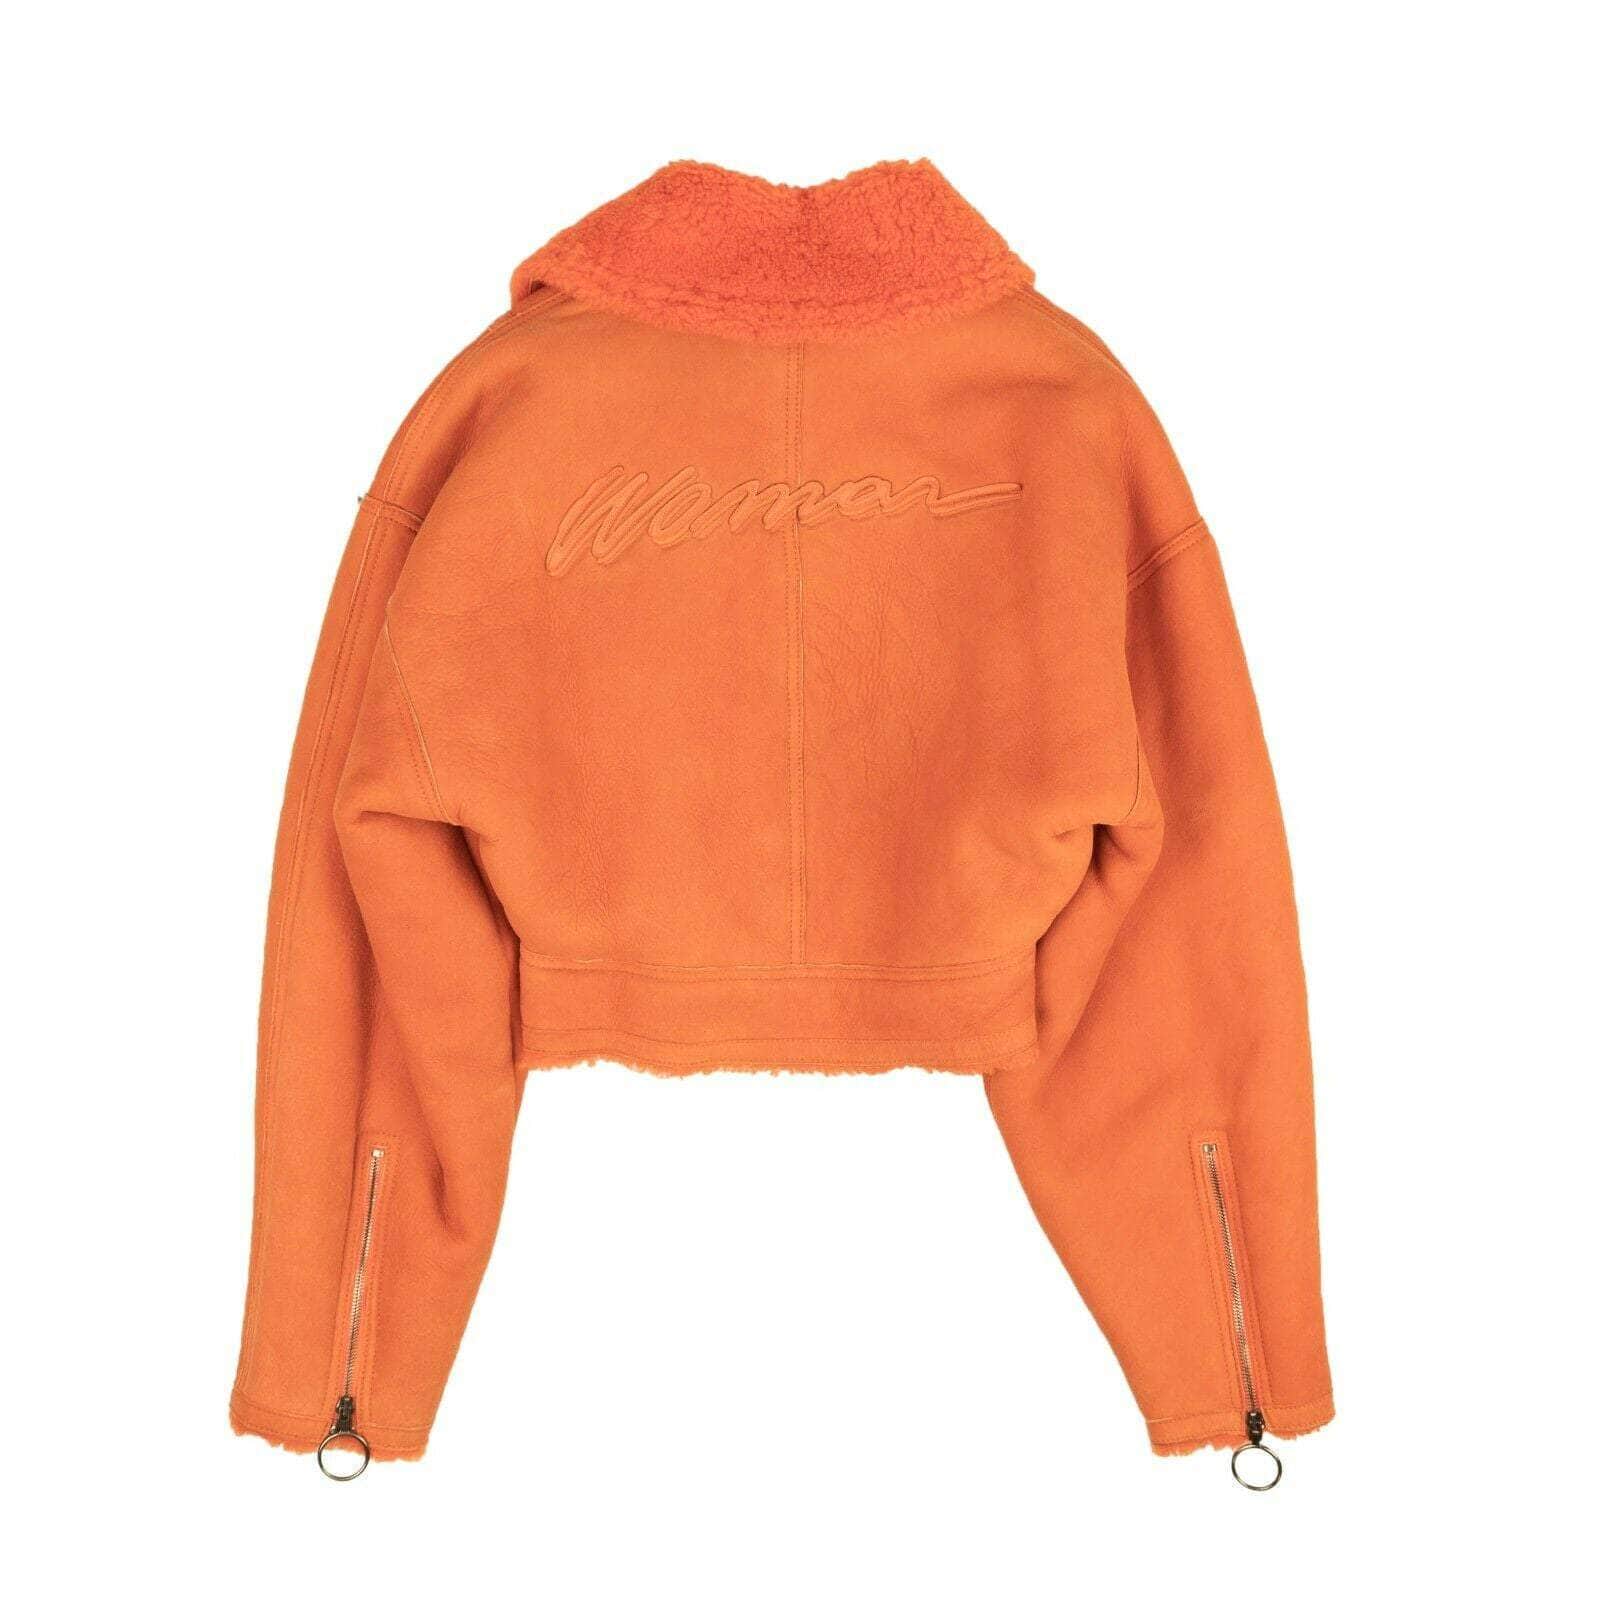 OFF-WHITE c/o VIRGIL ABLOH 2000-5000, channelenable-all, chicmi, couponcollection, gender-womens, main-clothing, off-white-c-o-virgil-abloh, size-40 40 Orange Cropped Shearling Jacket 82NGG-OW-210/40 82NGG-OW-210/40